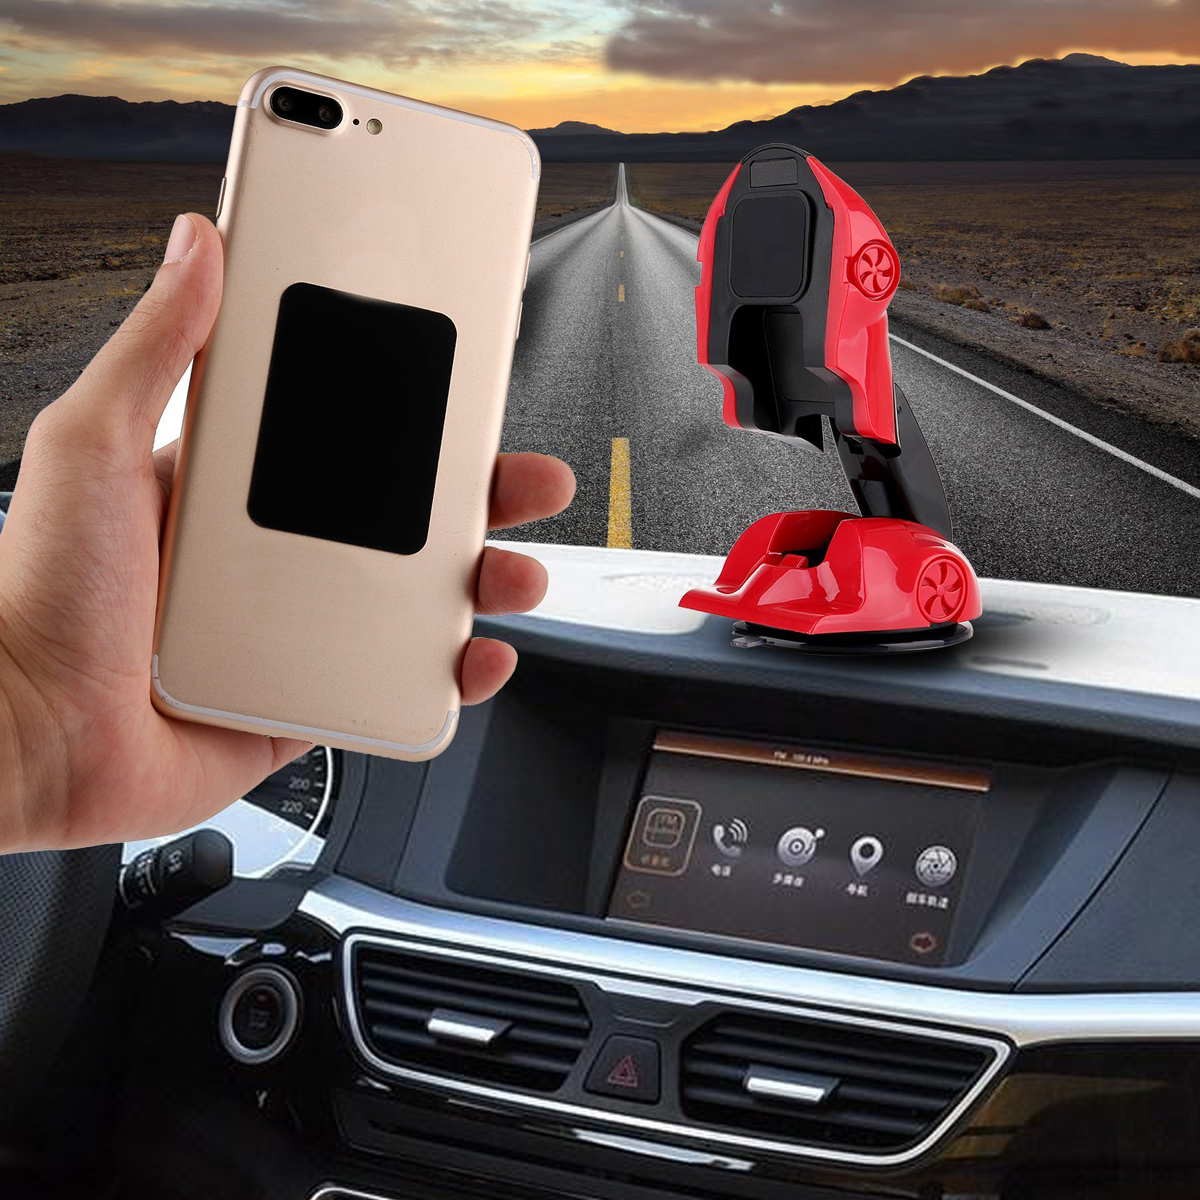 360-Degree-Rotation-Foldable-Car-Sucker-Dashboard-Holder-Magnetic-Phone-Stand-for-iPhone-Samsung-1258931